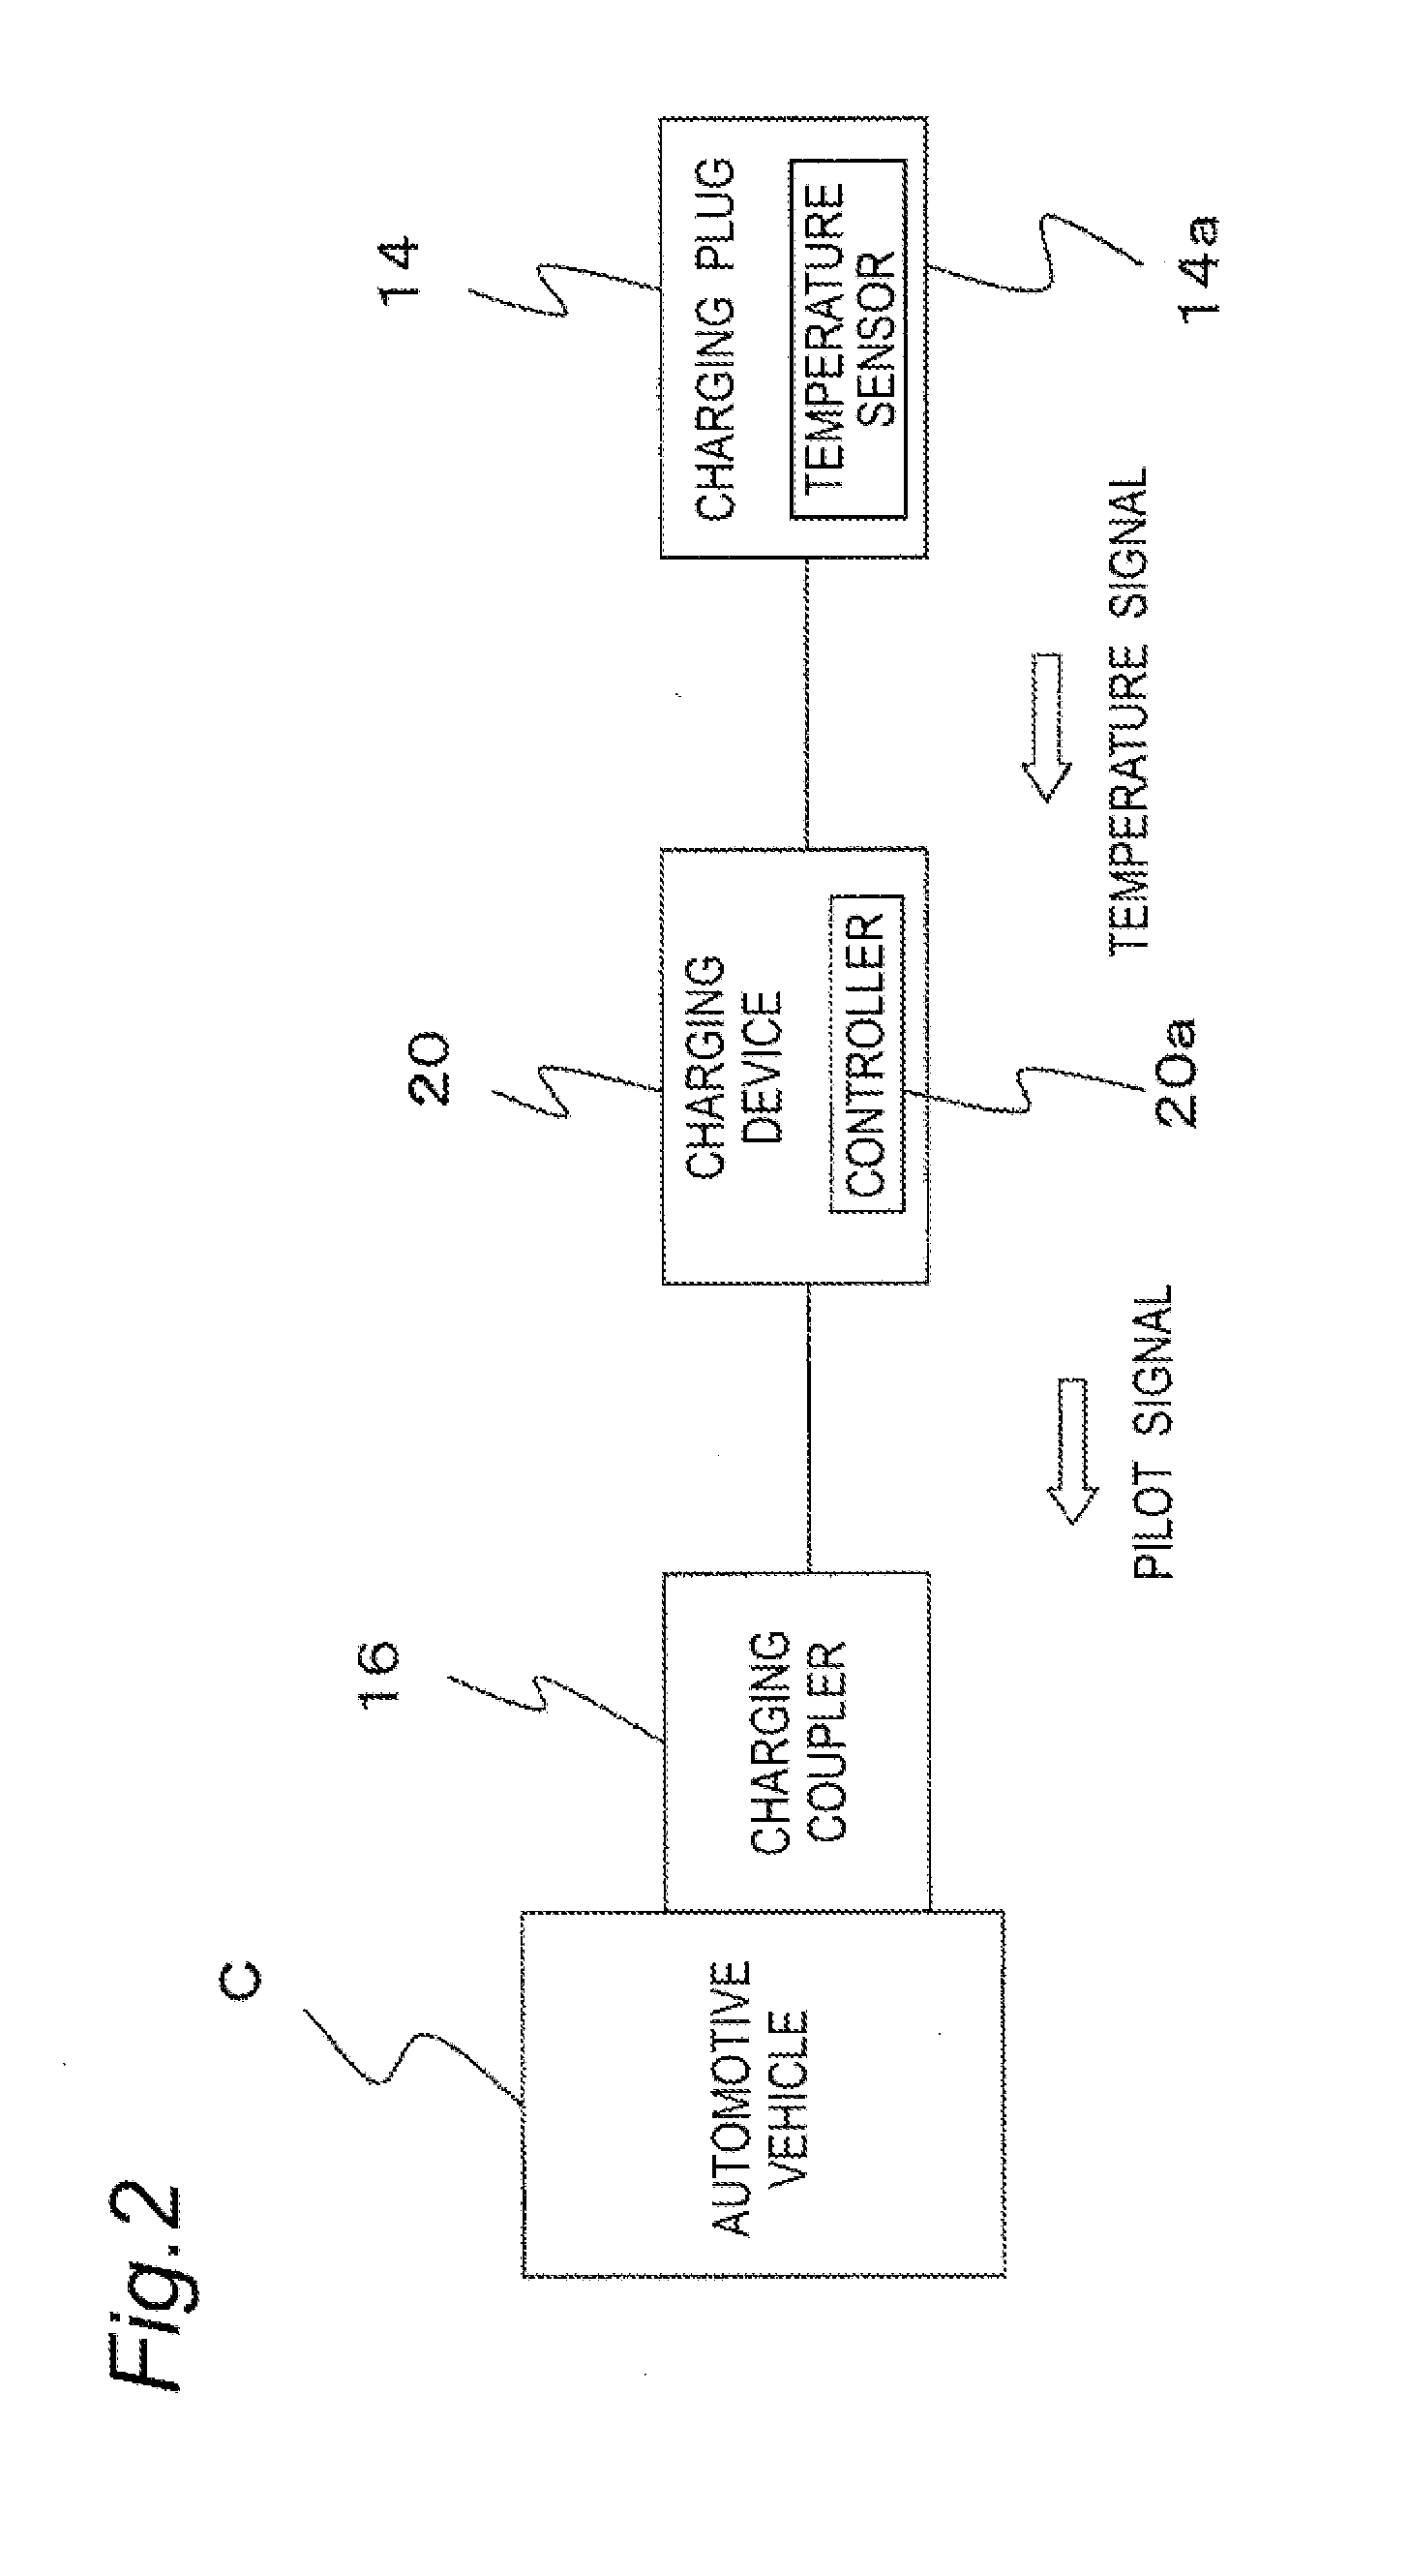 Charging cable for electrically-driven vehicle